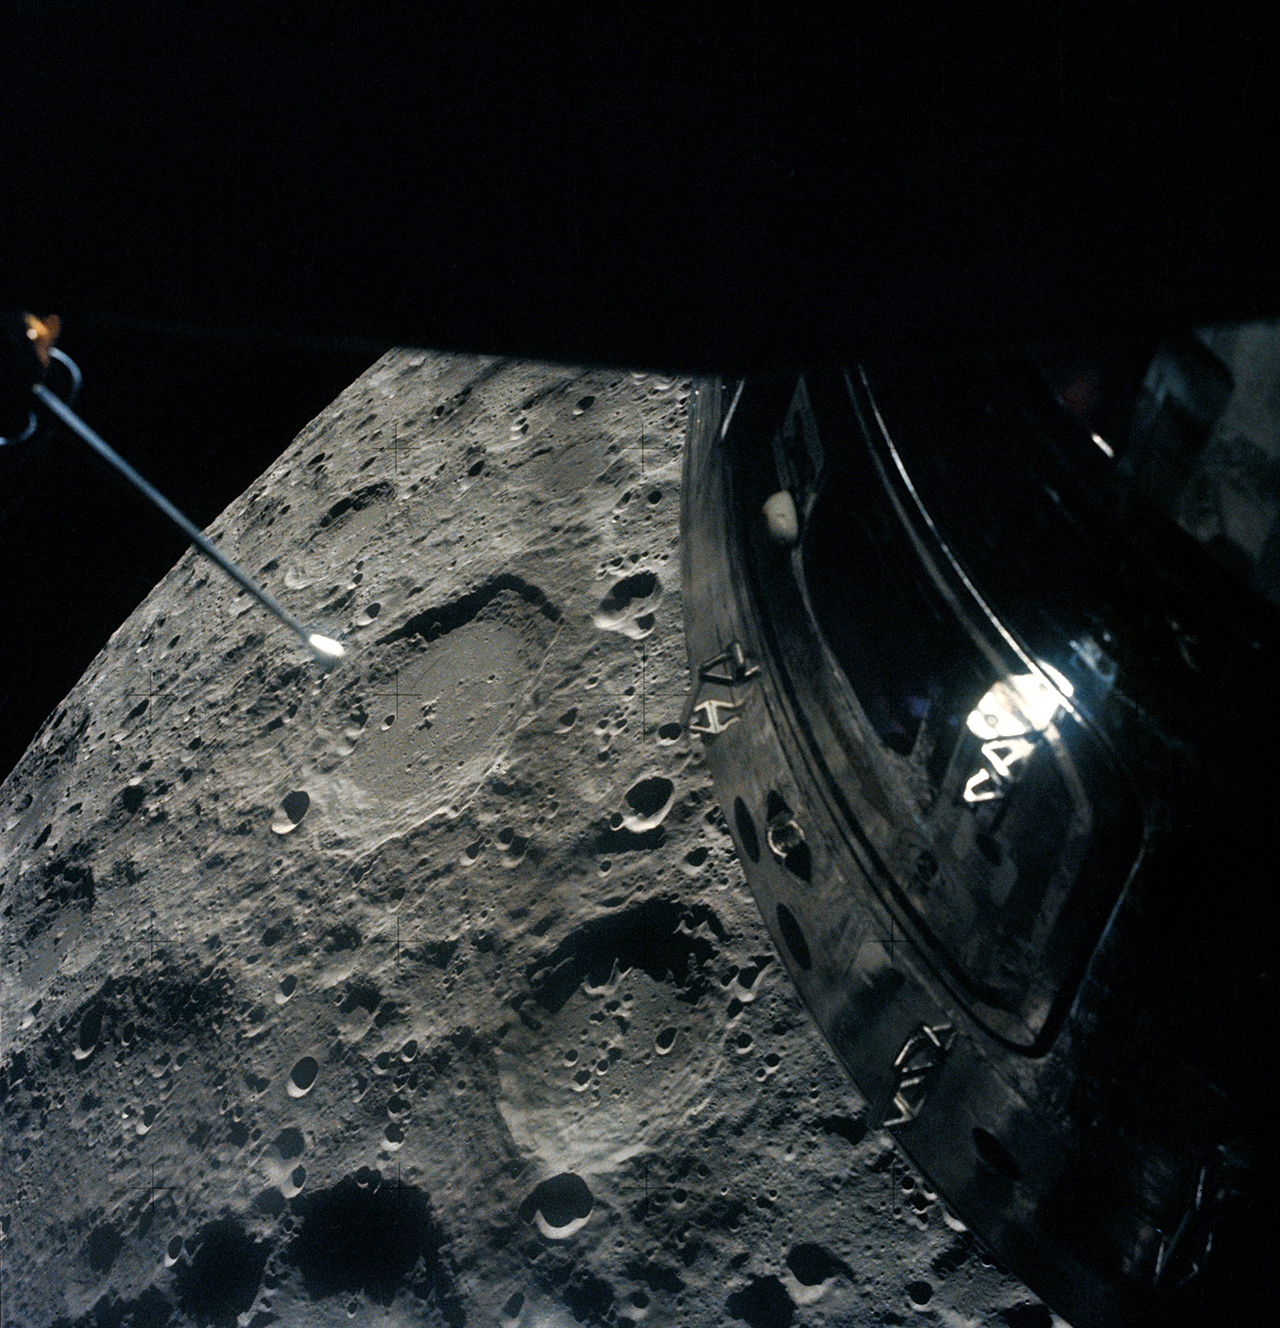 The moon and command module of Apollo 13 as seen from the mission's lunar module on April 15, 1970, a day after the crew and spacecraft set a record for the farthest distance traveled from Earth